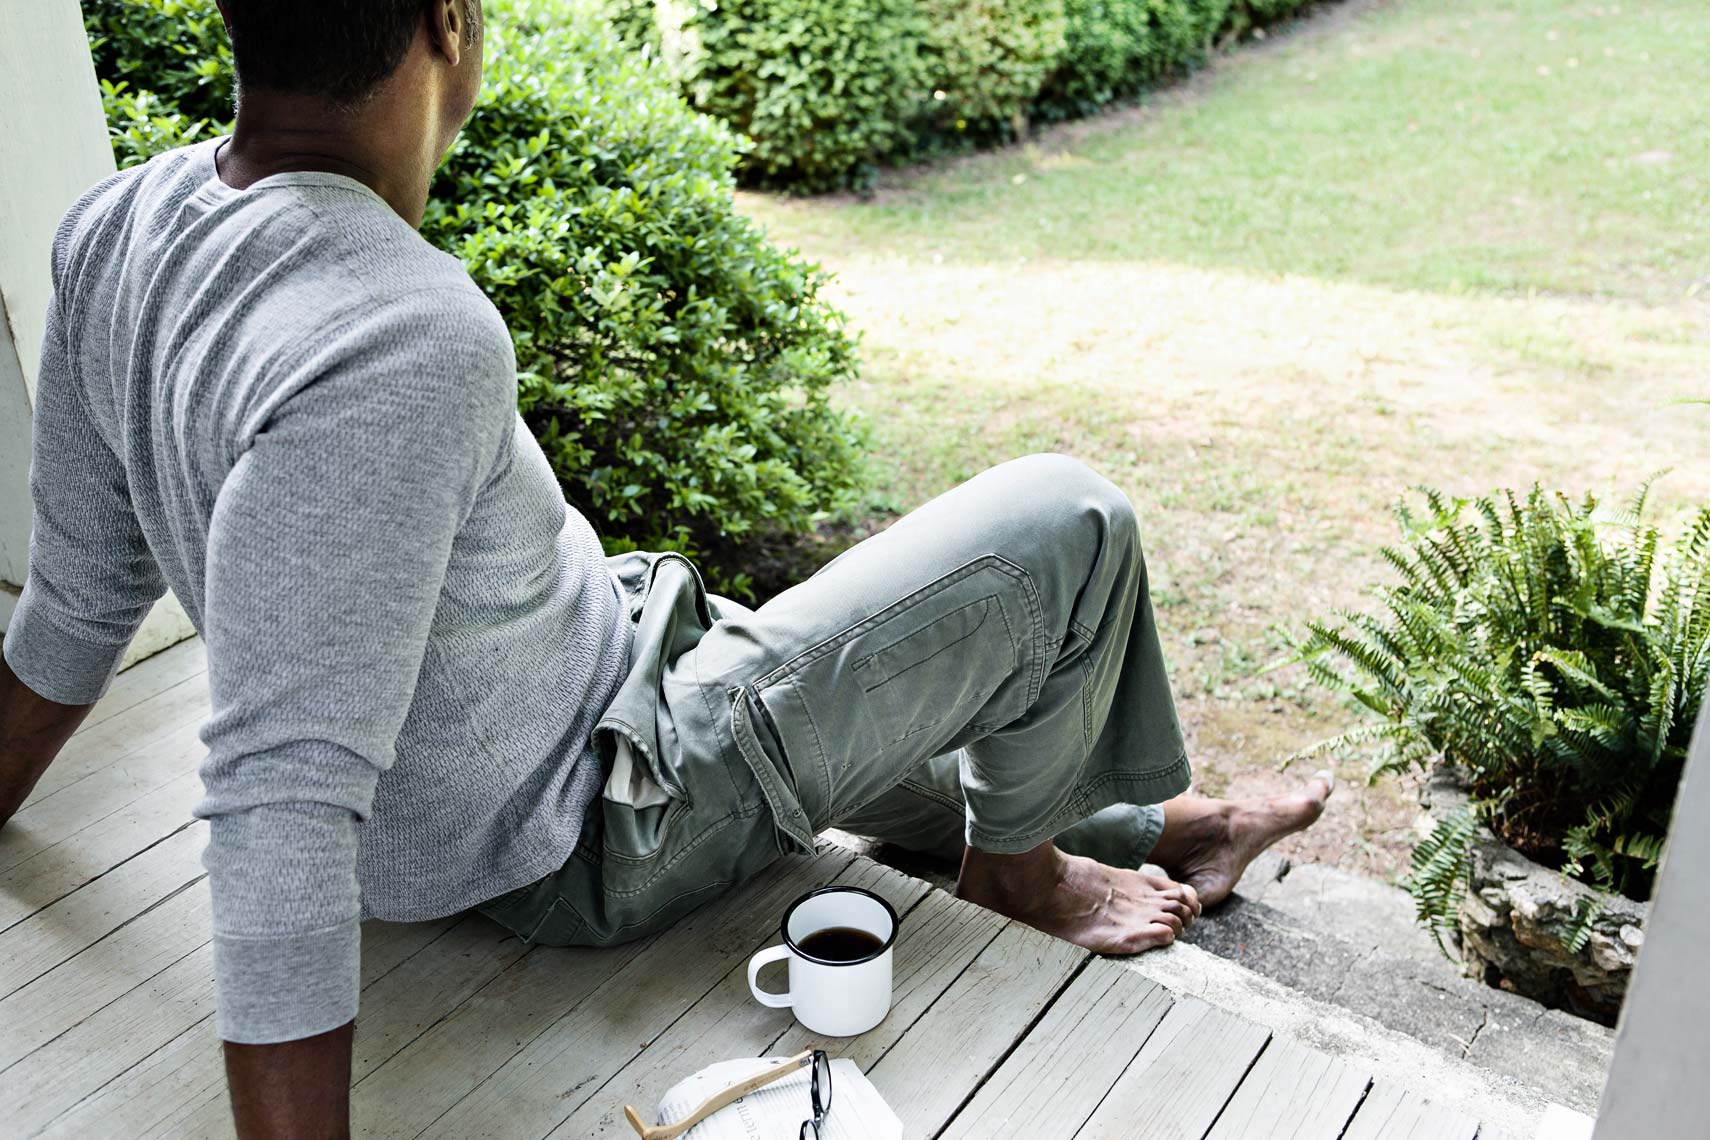 African American man relaxes with coffee on steps of home, Atlanta